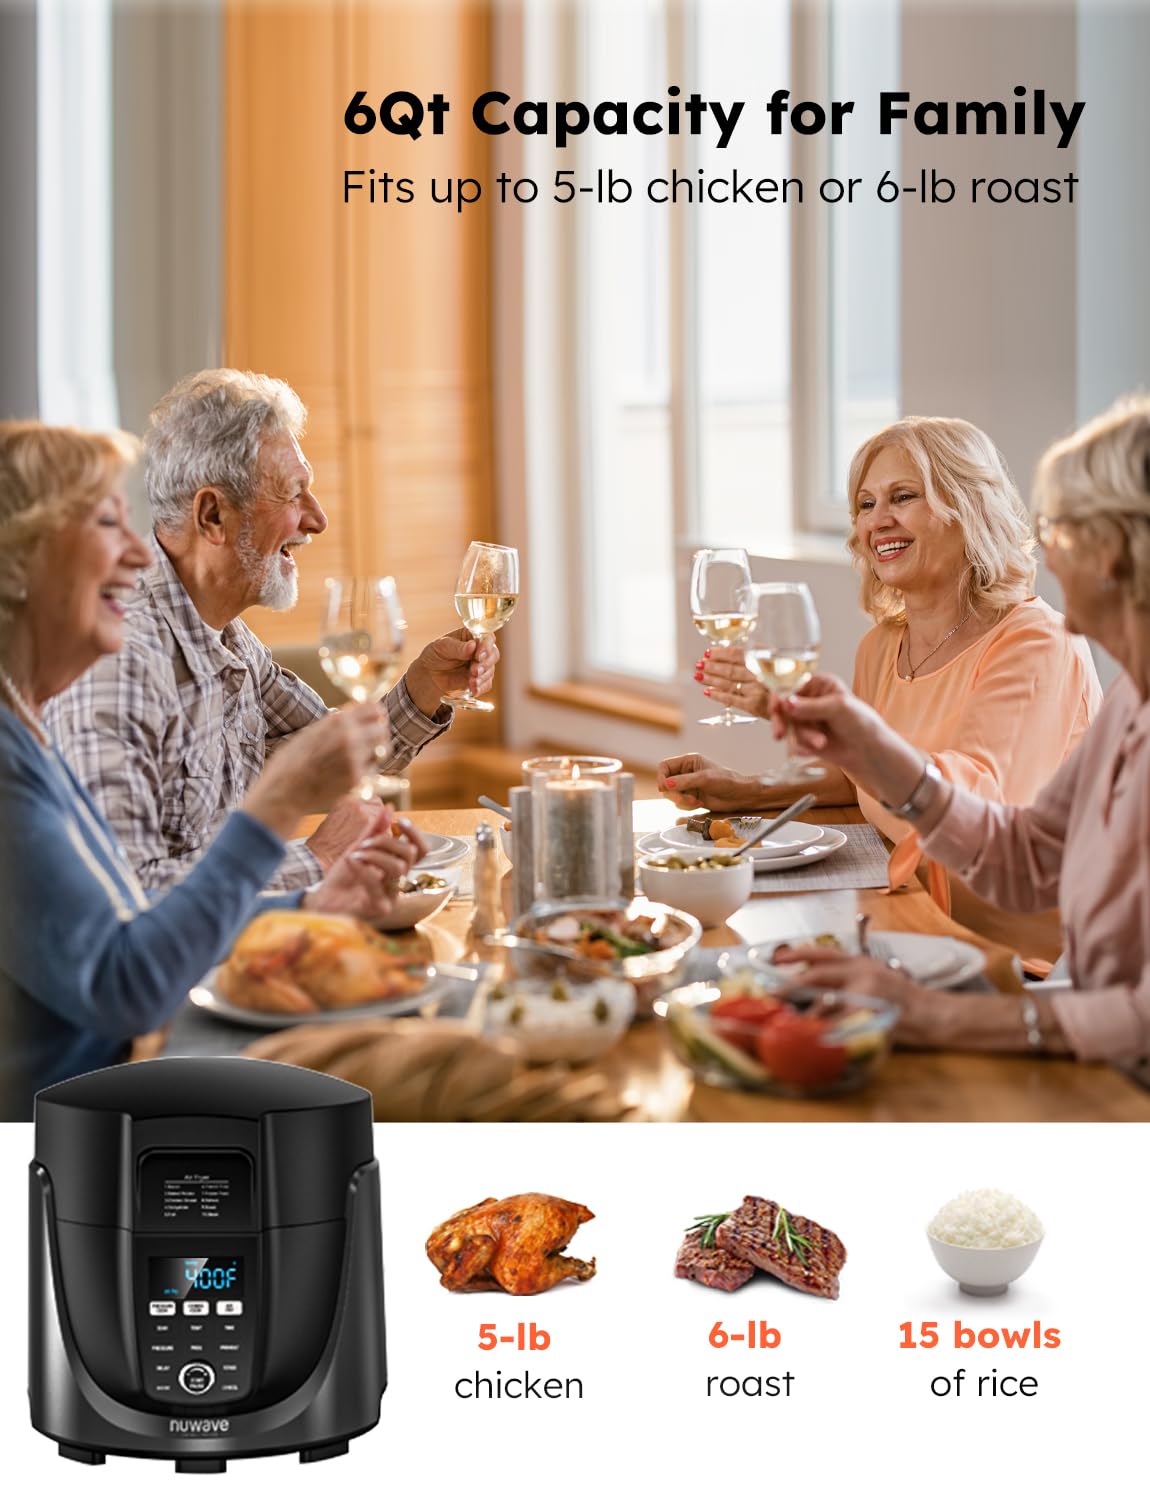 NuWave Duet Air Fryer, Electric Pressure Cooker & Grill Combo, 540 IN 1 Multicooker with 3 Removable Lids that Slow Cook, Sears, Sautés, 18/10 SS Pot, Sure-Lock Safety Tech & 10 Deluxe Accessories